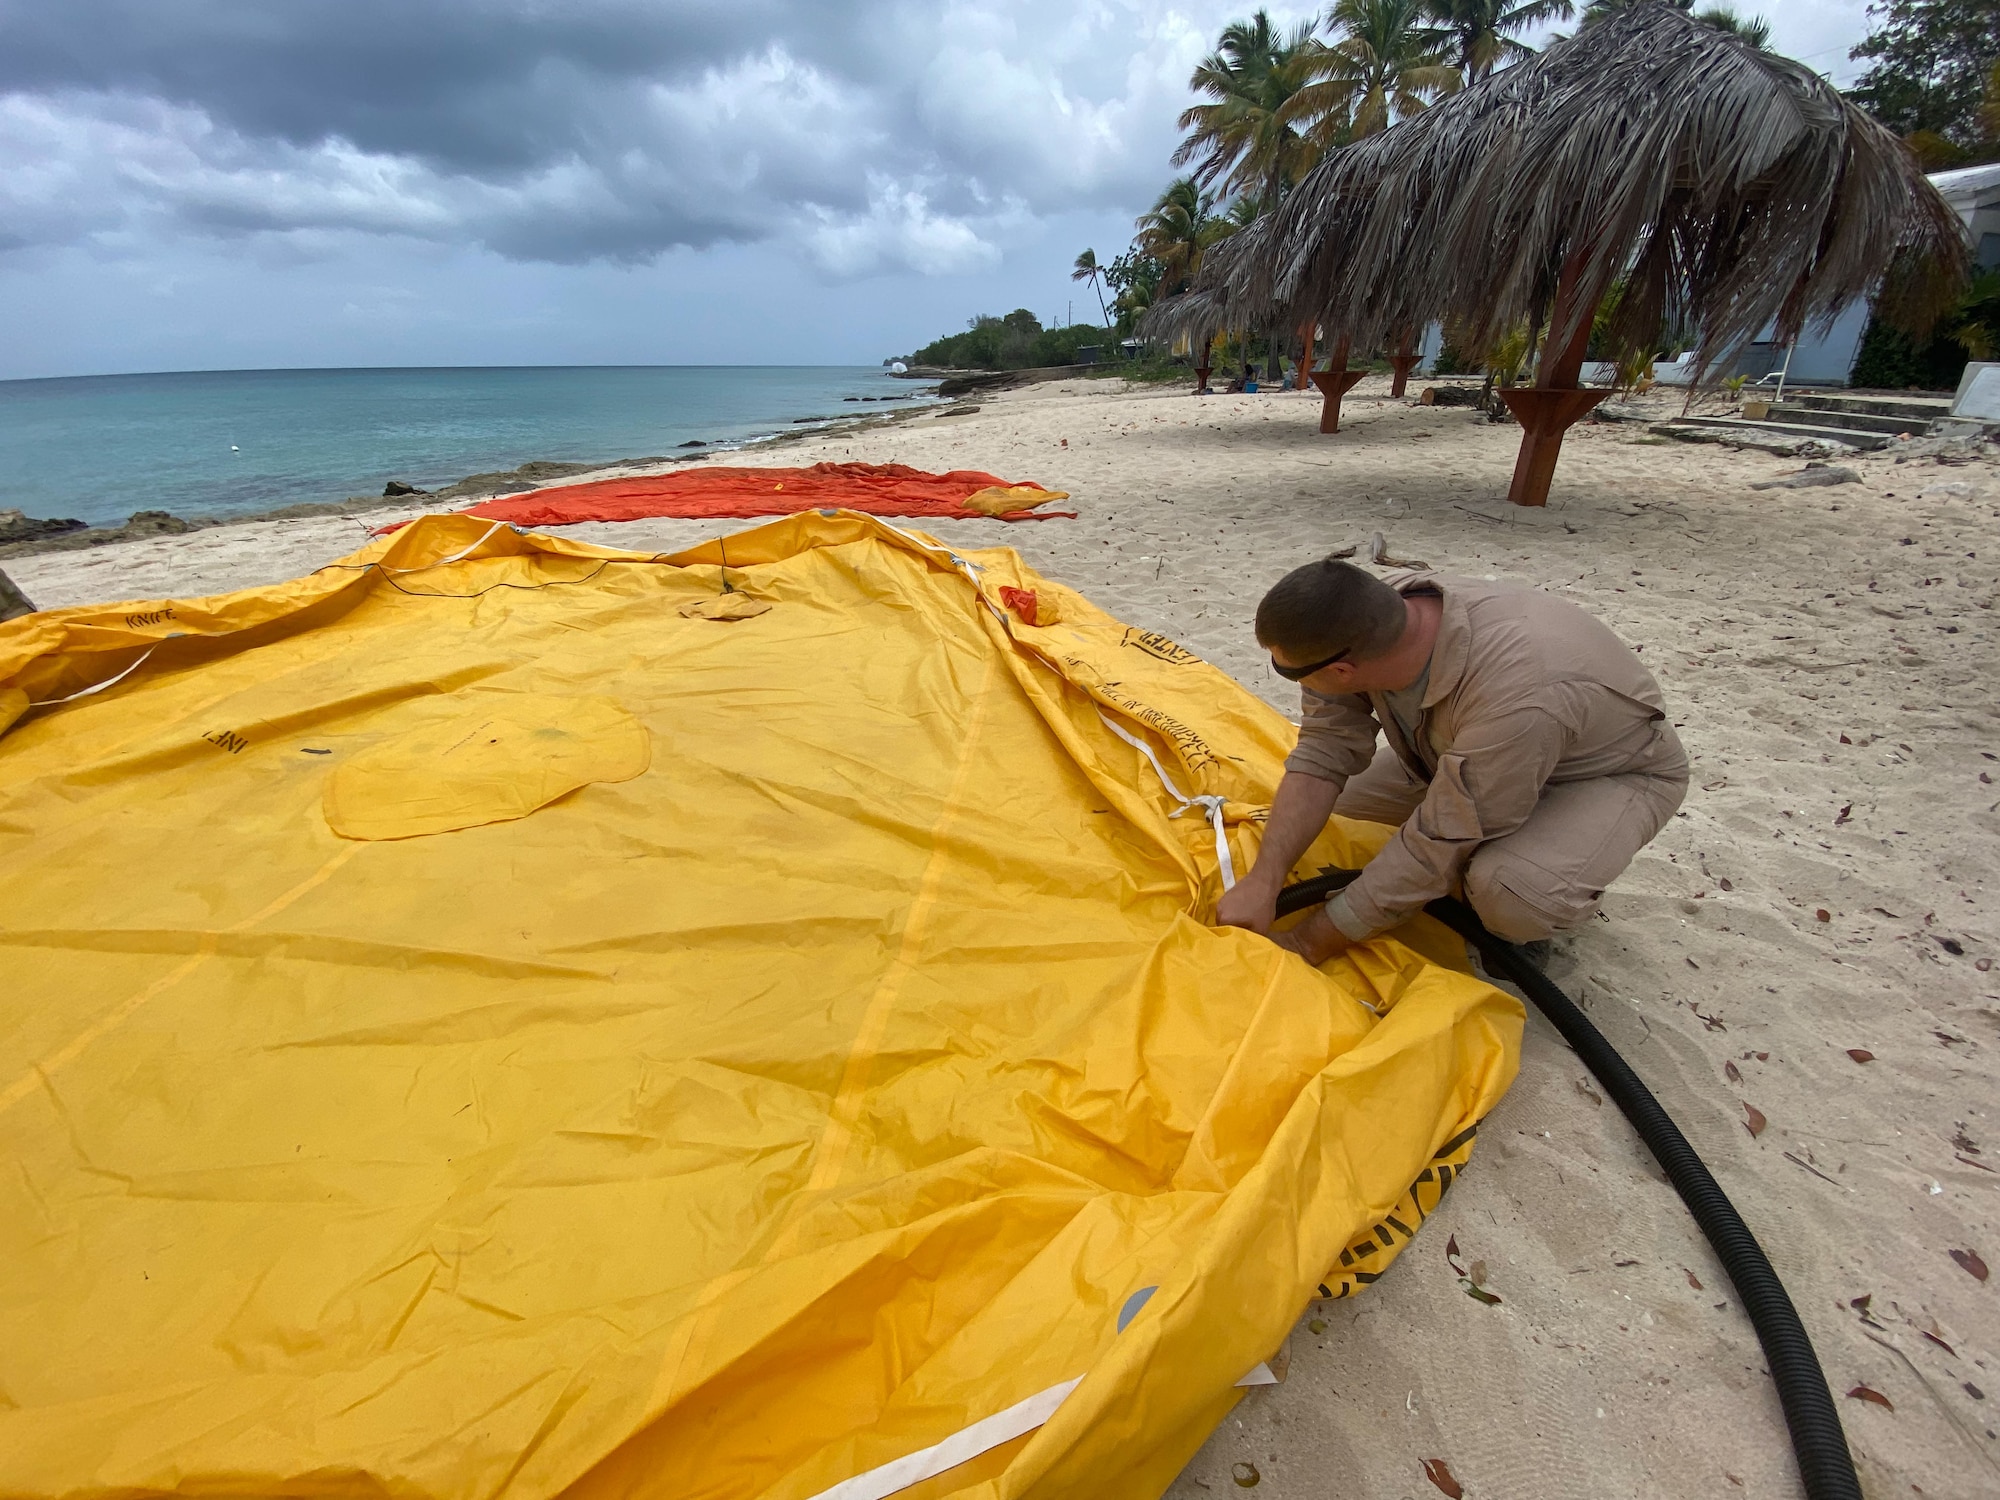 A large yellow raft lays on the beach. An Airman crouches to it, inflating it.